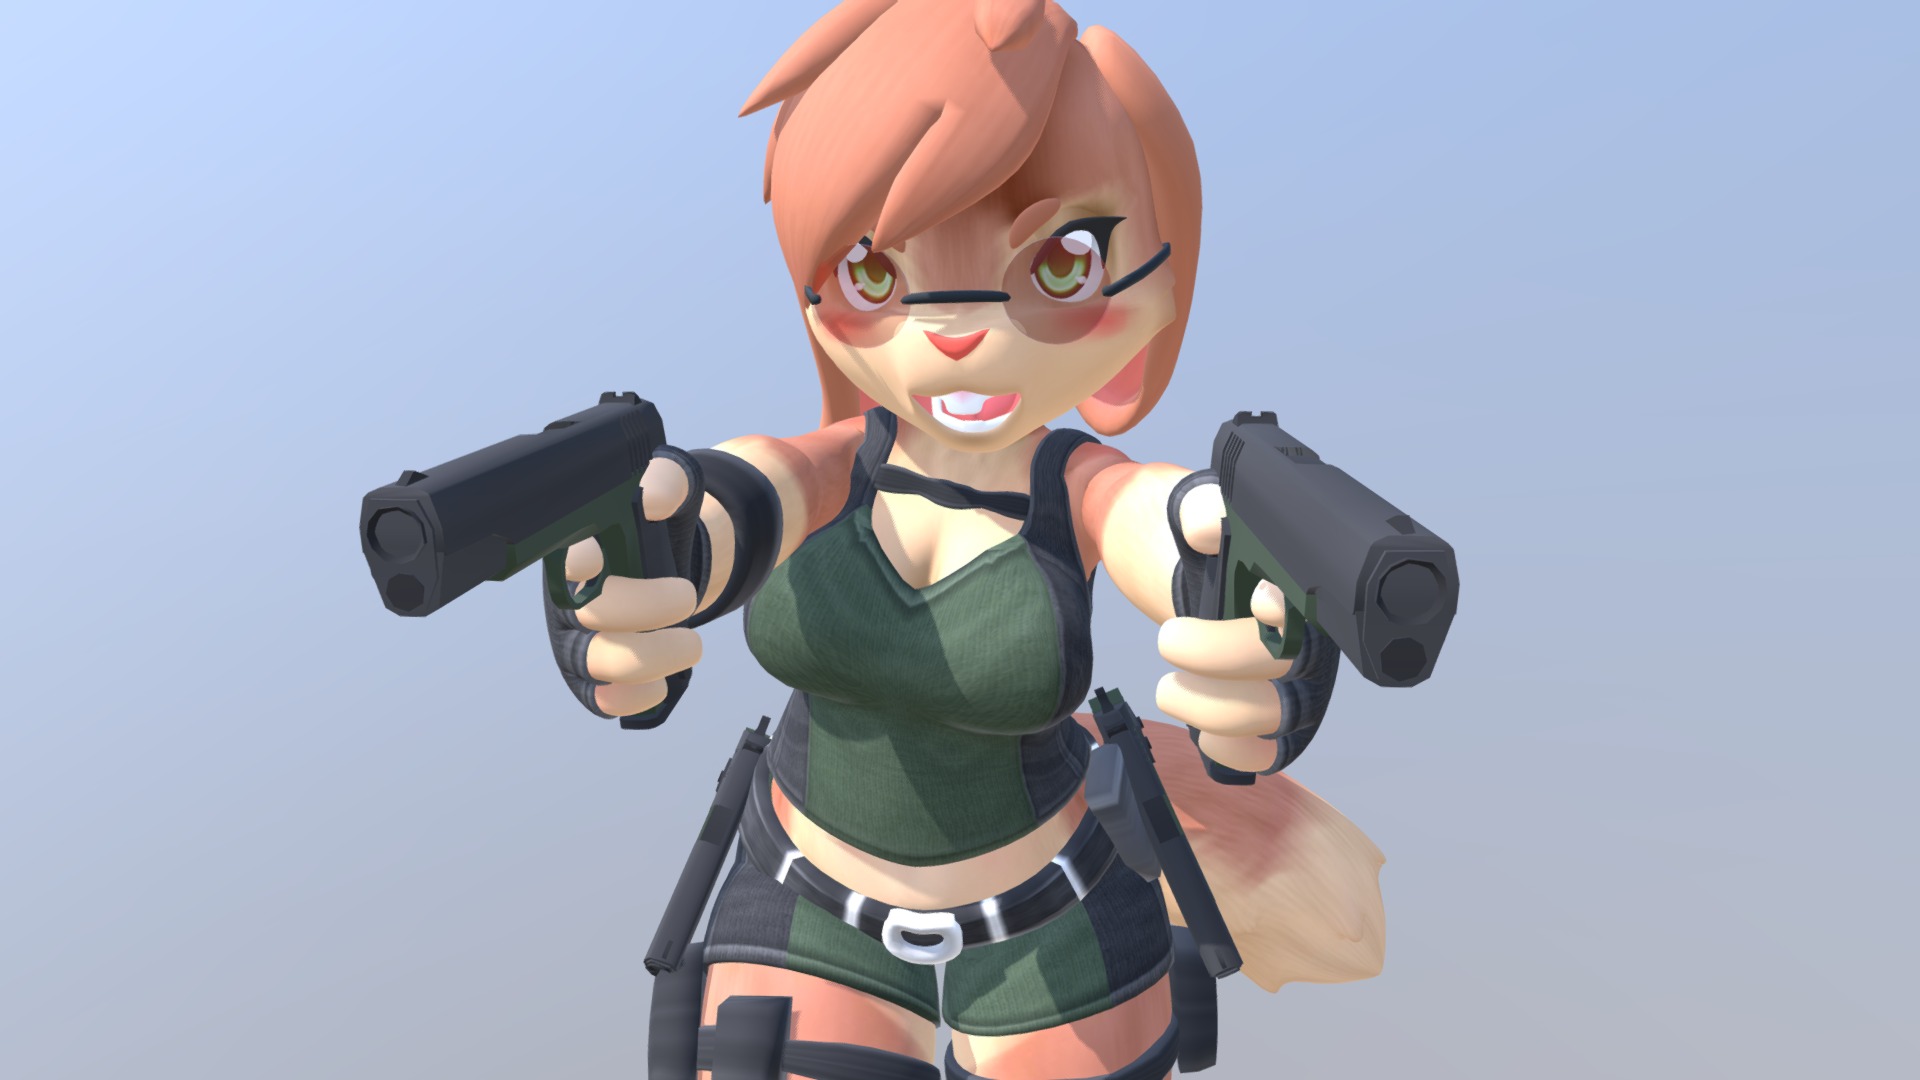 Comission to @Ashley_Johnson 
Commissions: https://www.furaffinity.net/commissions/hickysnow/ - Ashley Tomb Raider Outfit - 3D model by HickySnow (@Hicky_Snow) 3d model